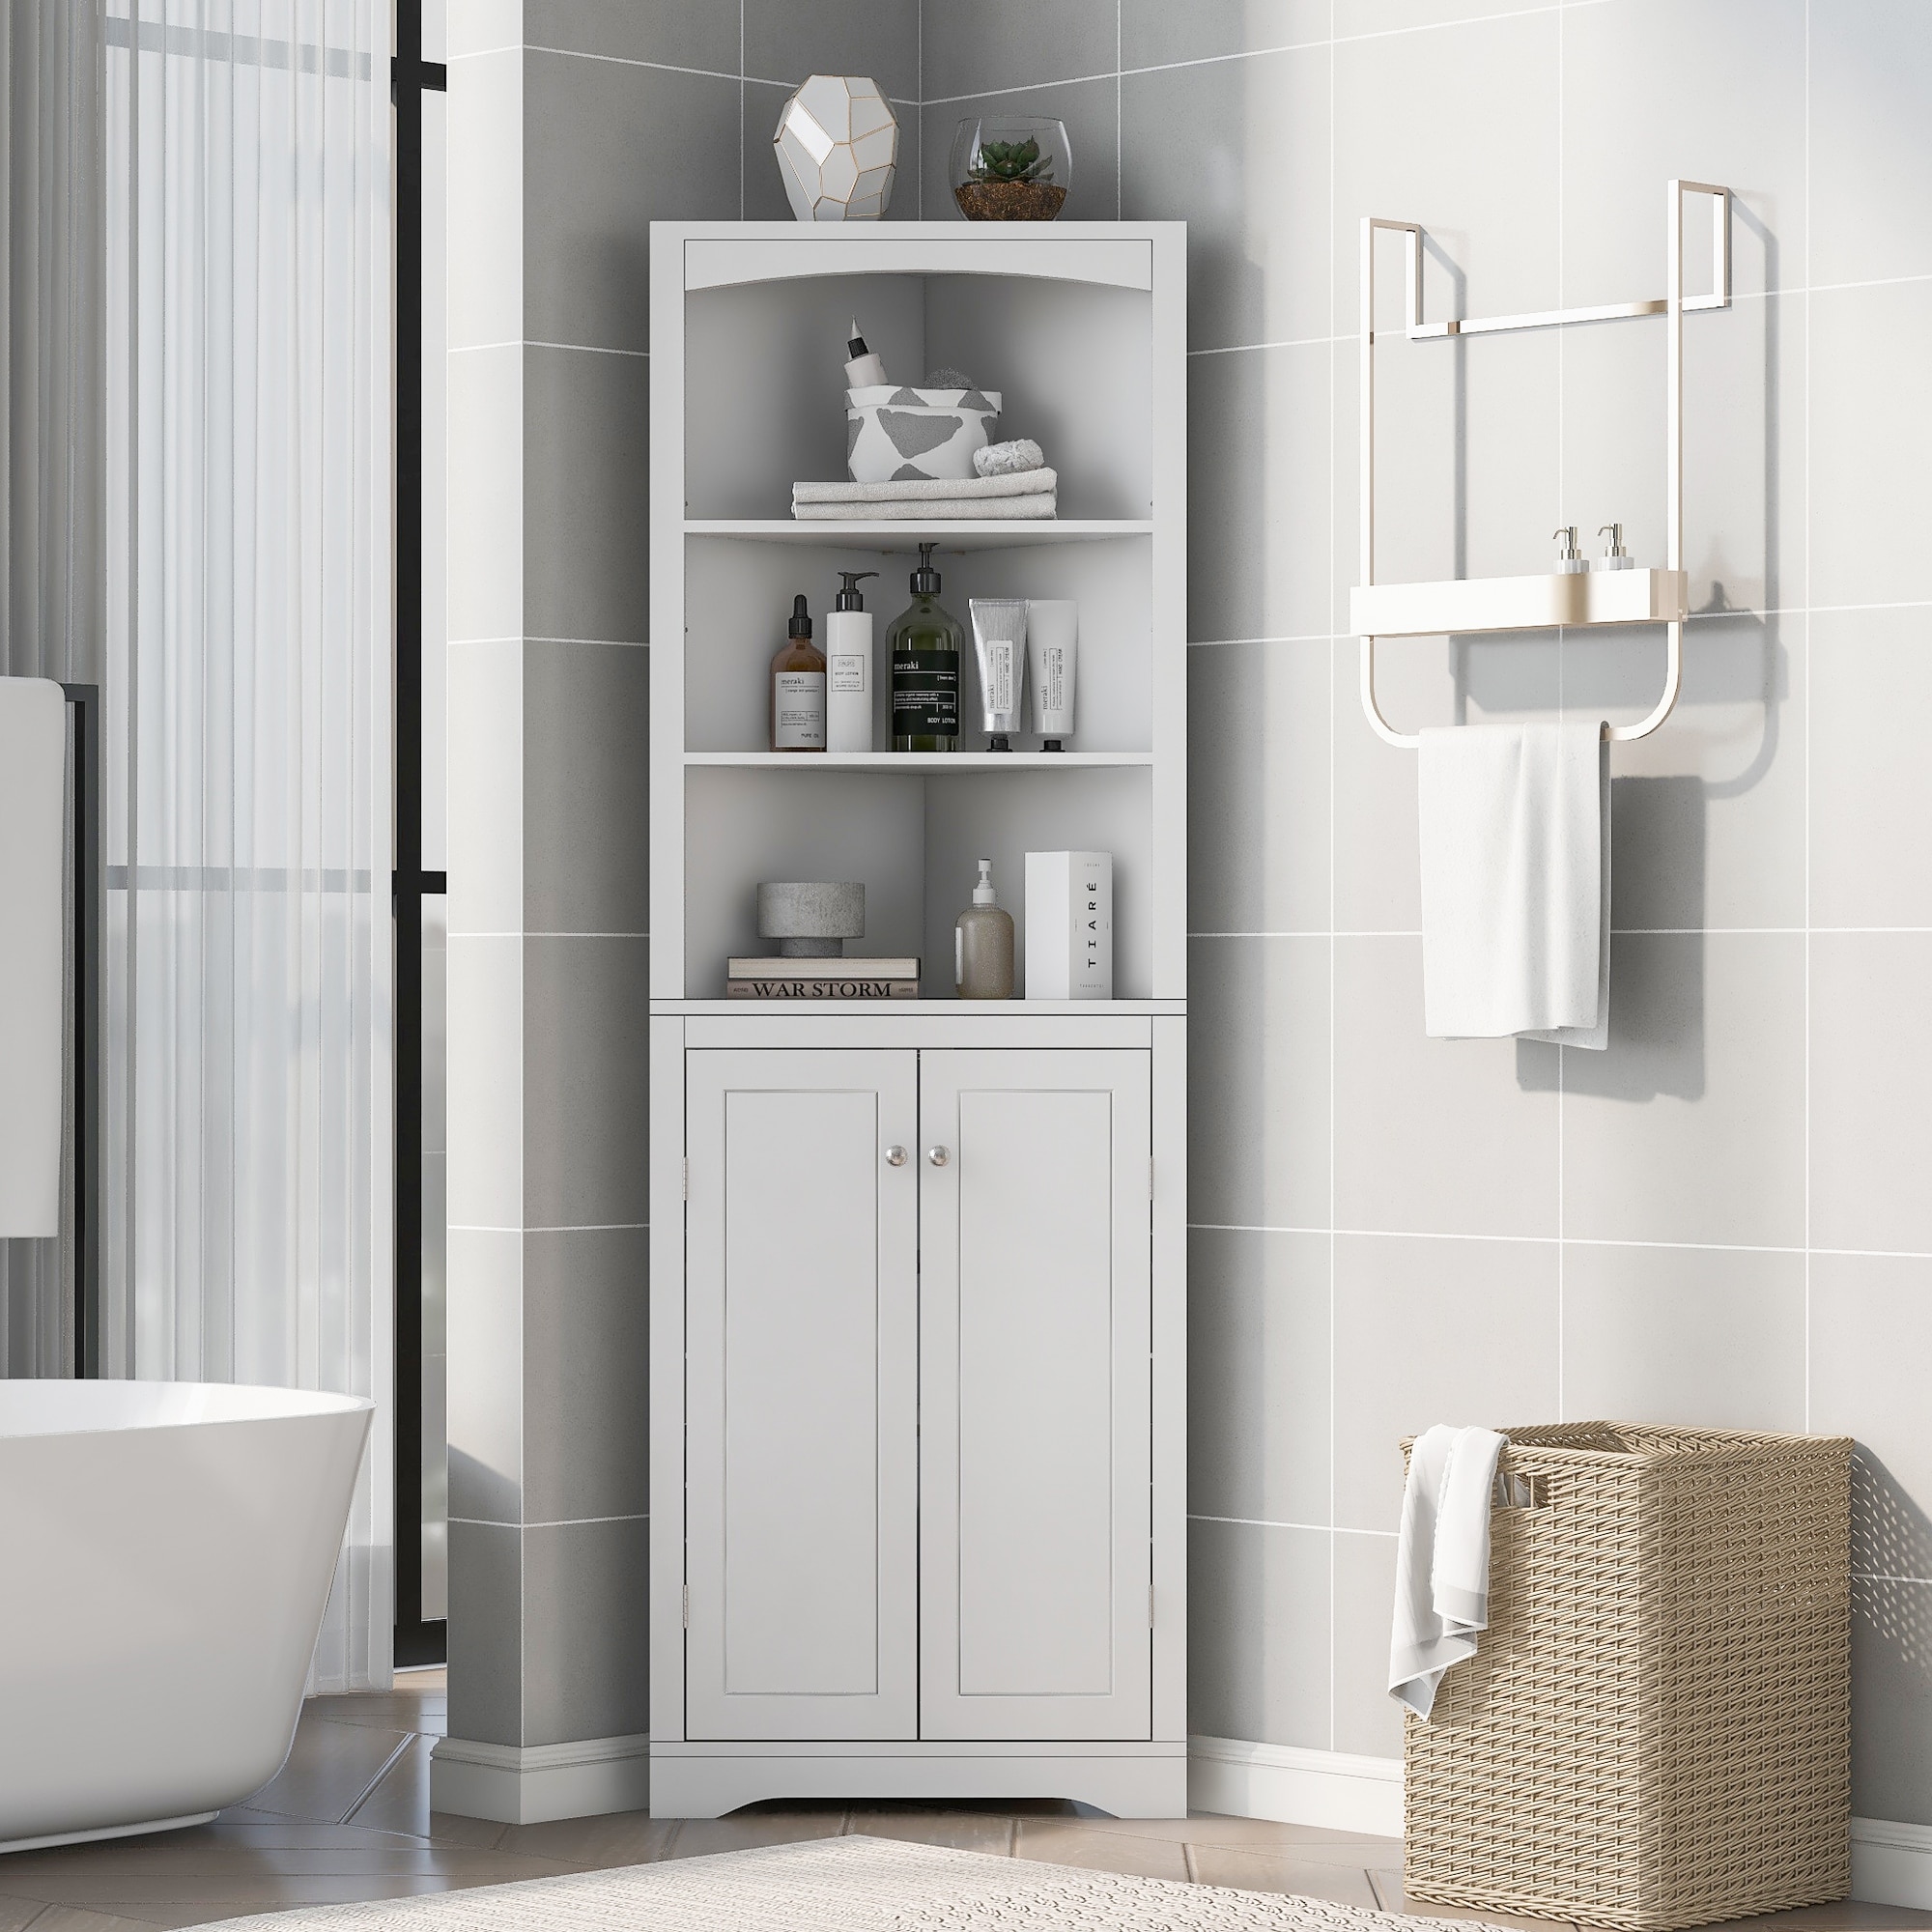 https://ak1.ostkcdn.com/images/products/is/images/direct/800c10680e92ad21519e9fa0578197898a40a55f/Bathroom-Storage-Corner-Cabinet-with-Adjustable-Shelves.jpg